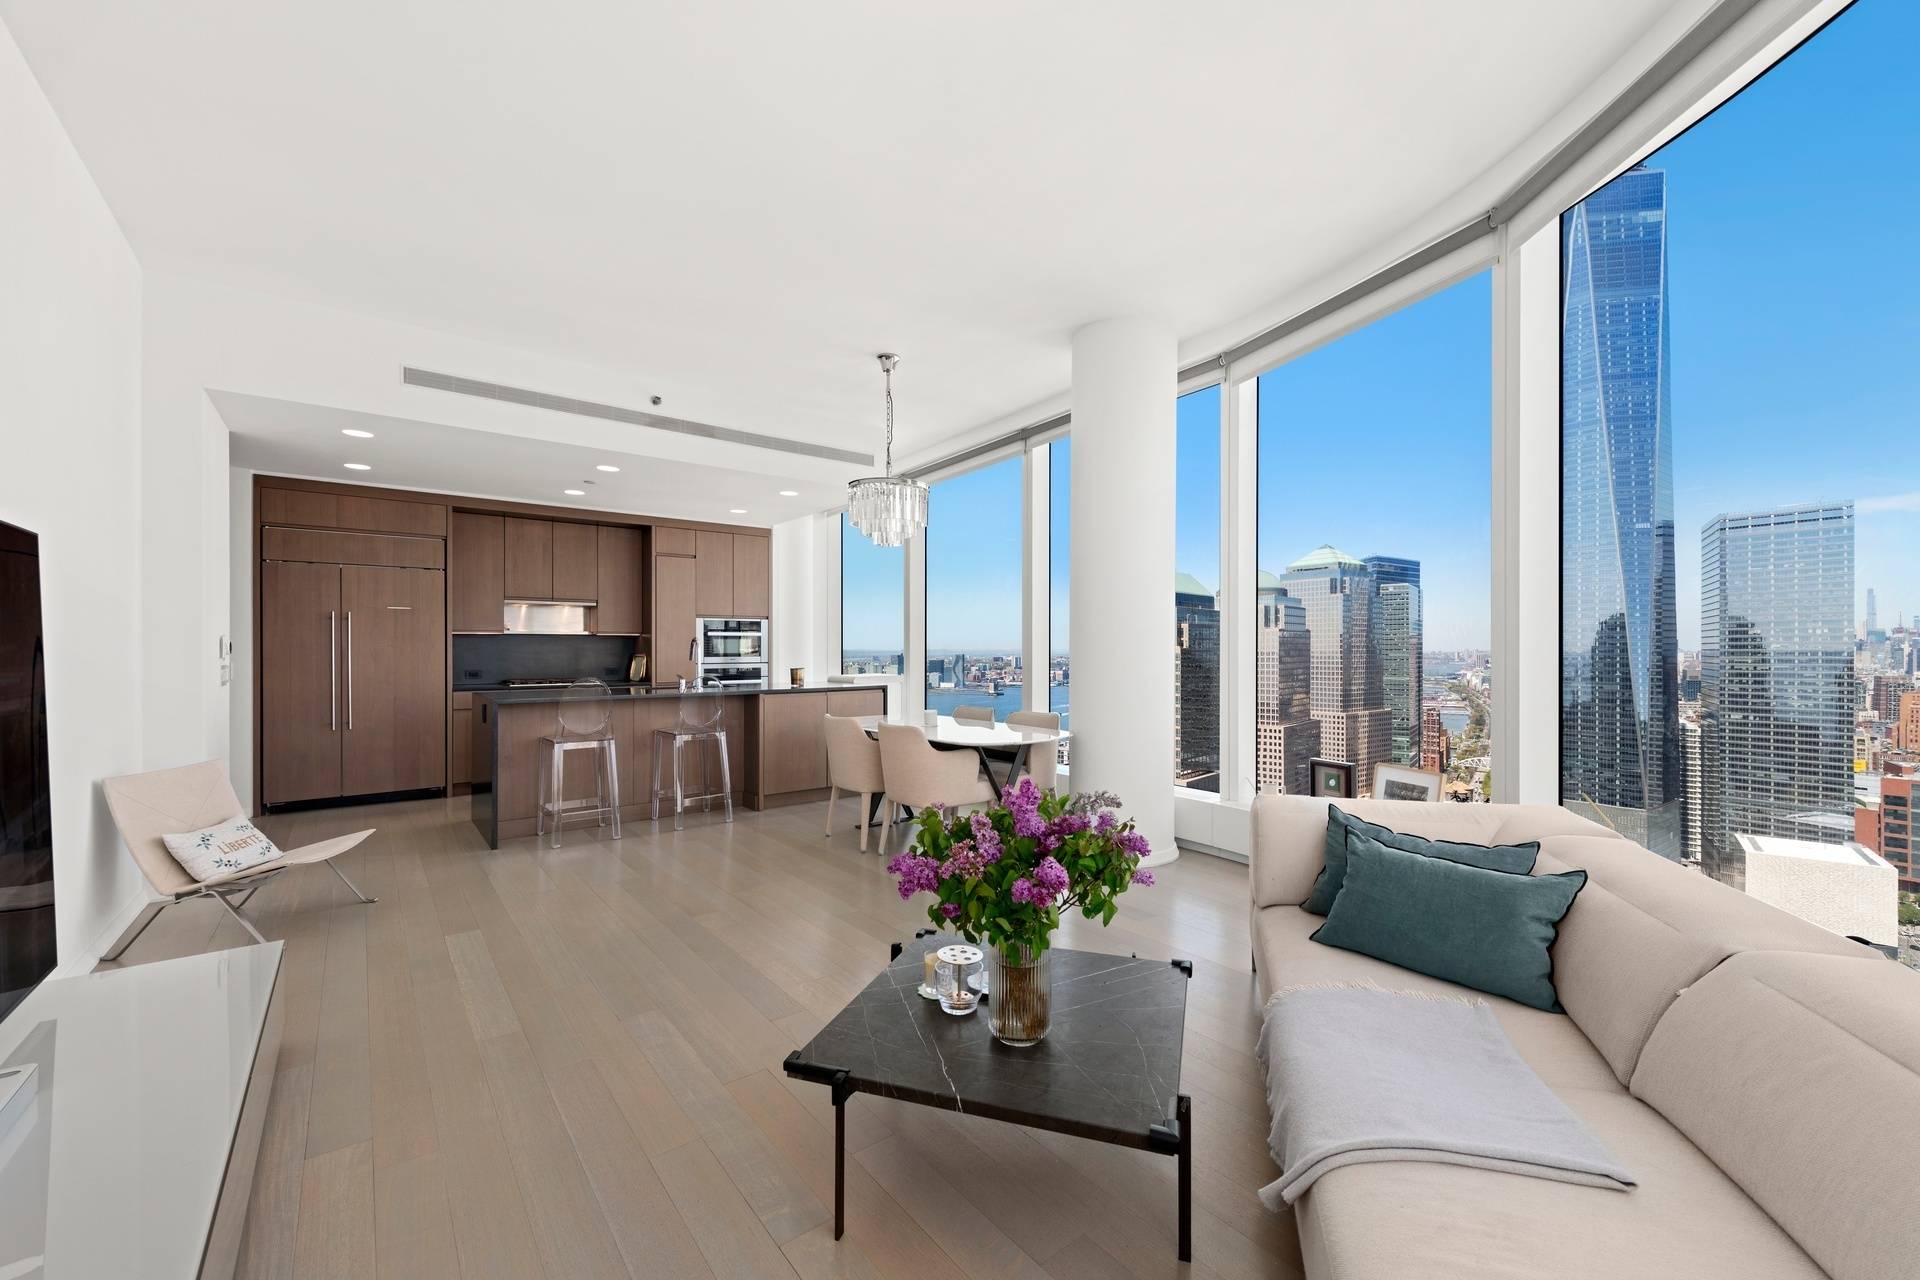 Welcome to apartment 43A, a zen like and generously sized, 1734SF convertible 3 bedroom, 3 bathroom with jaw dropping views of lower Manhattan, the Hudson River and Freedom Tower from ...